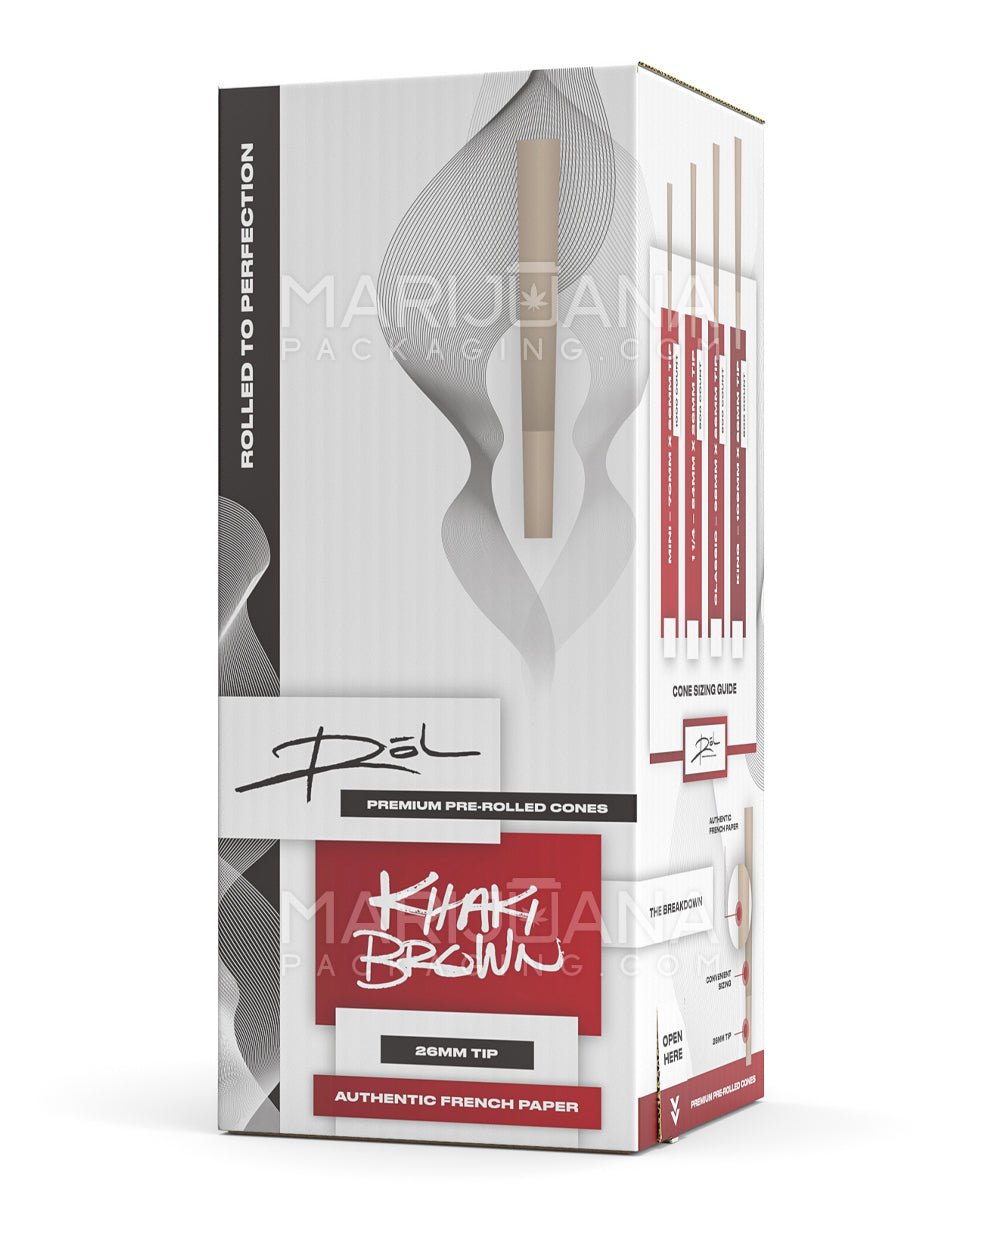 ROL | 98 Special Size Pre-Rolled Cones | 98mm - Khaki Brown Paper - 800 Count - 2